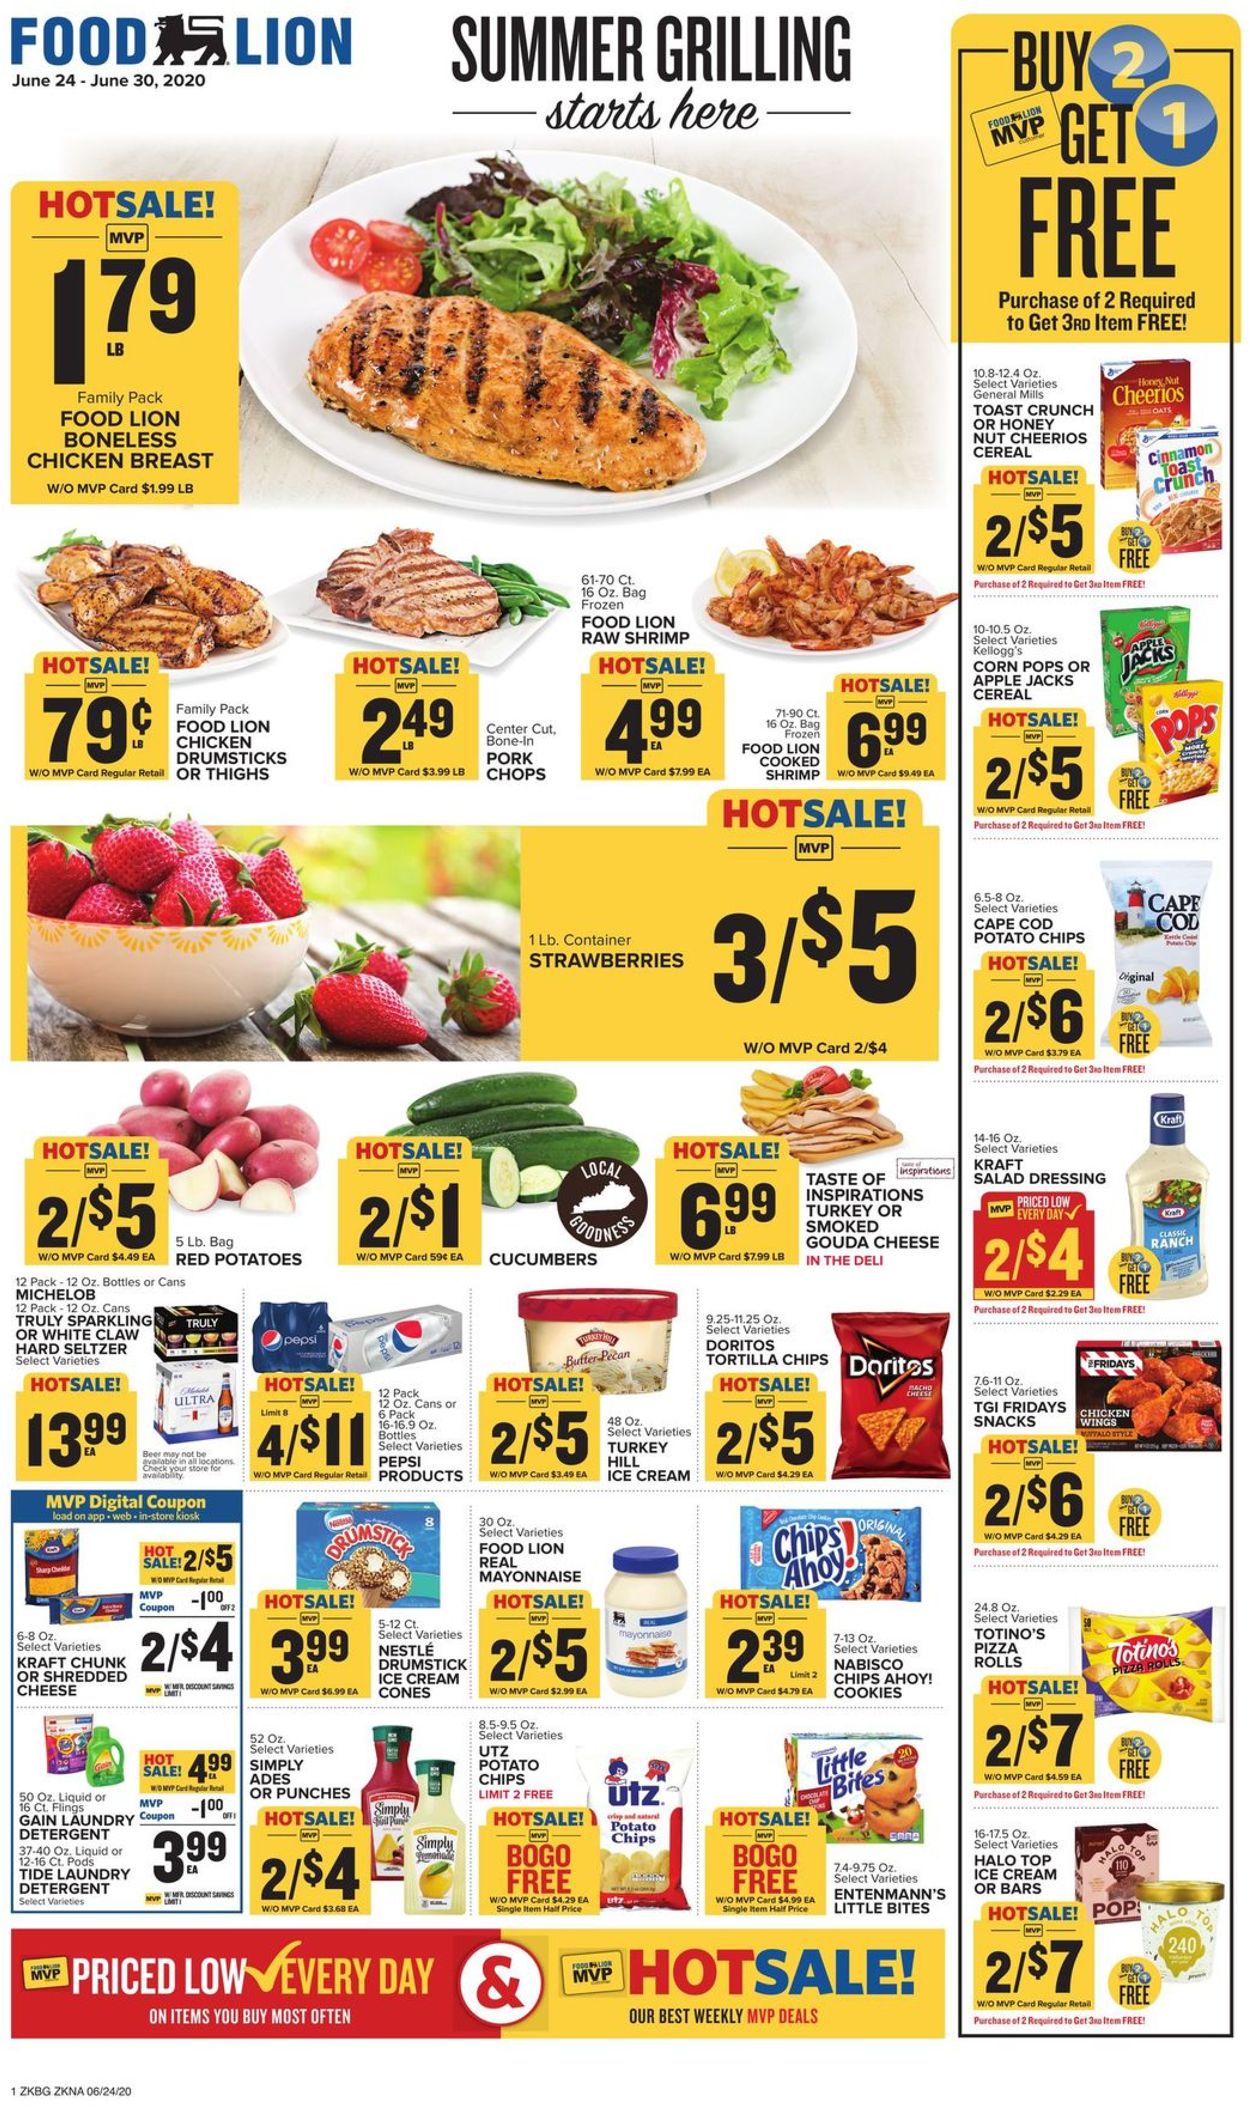 Food Lion Current weekly ad 06/24 - 06/30/2020 - frequent-ads.com